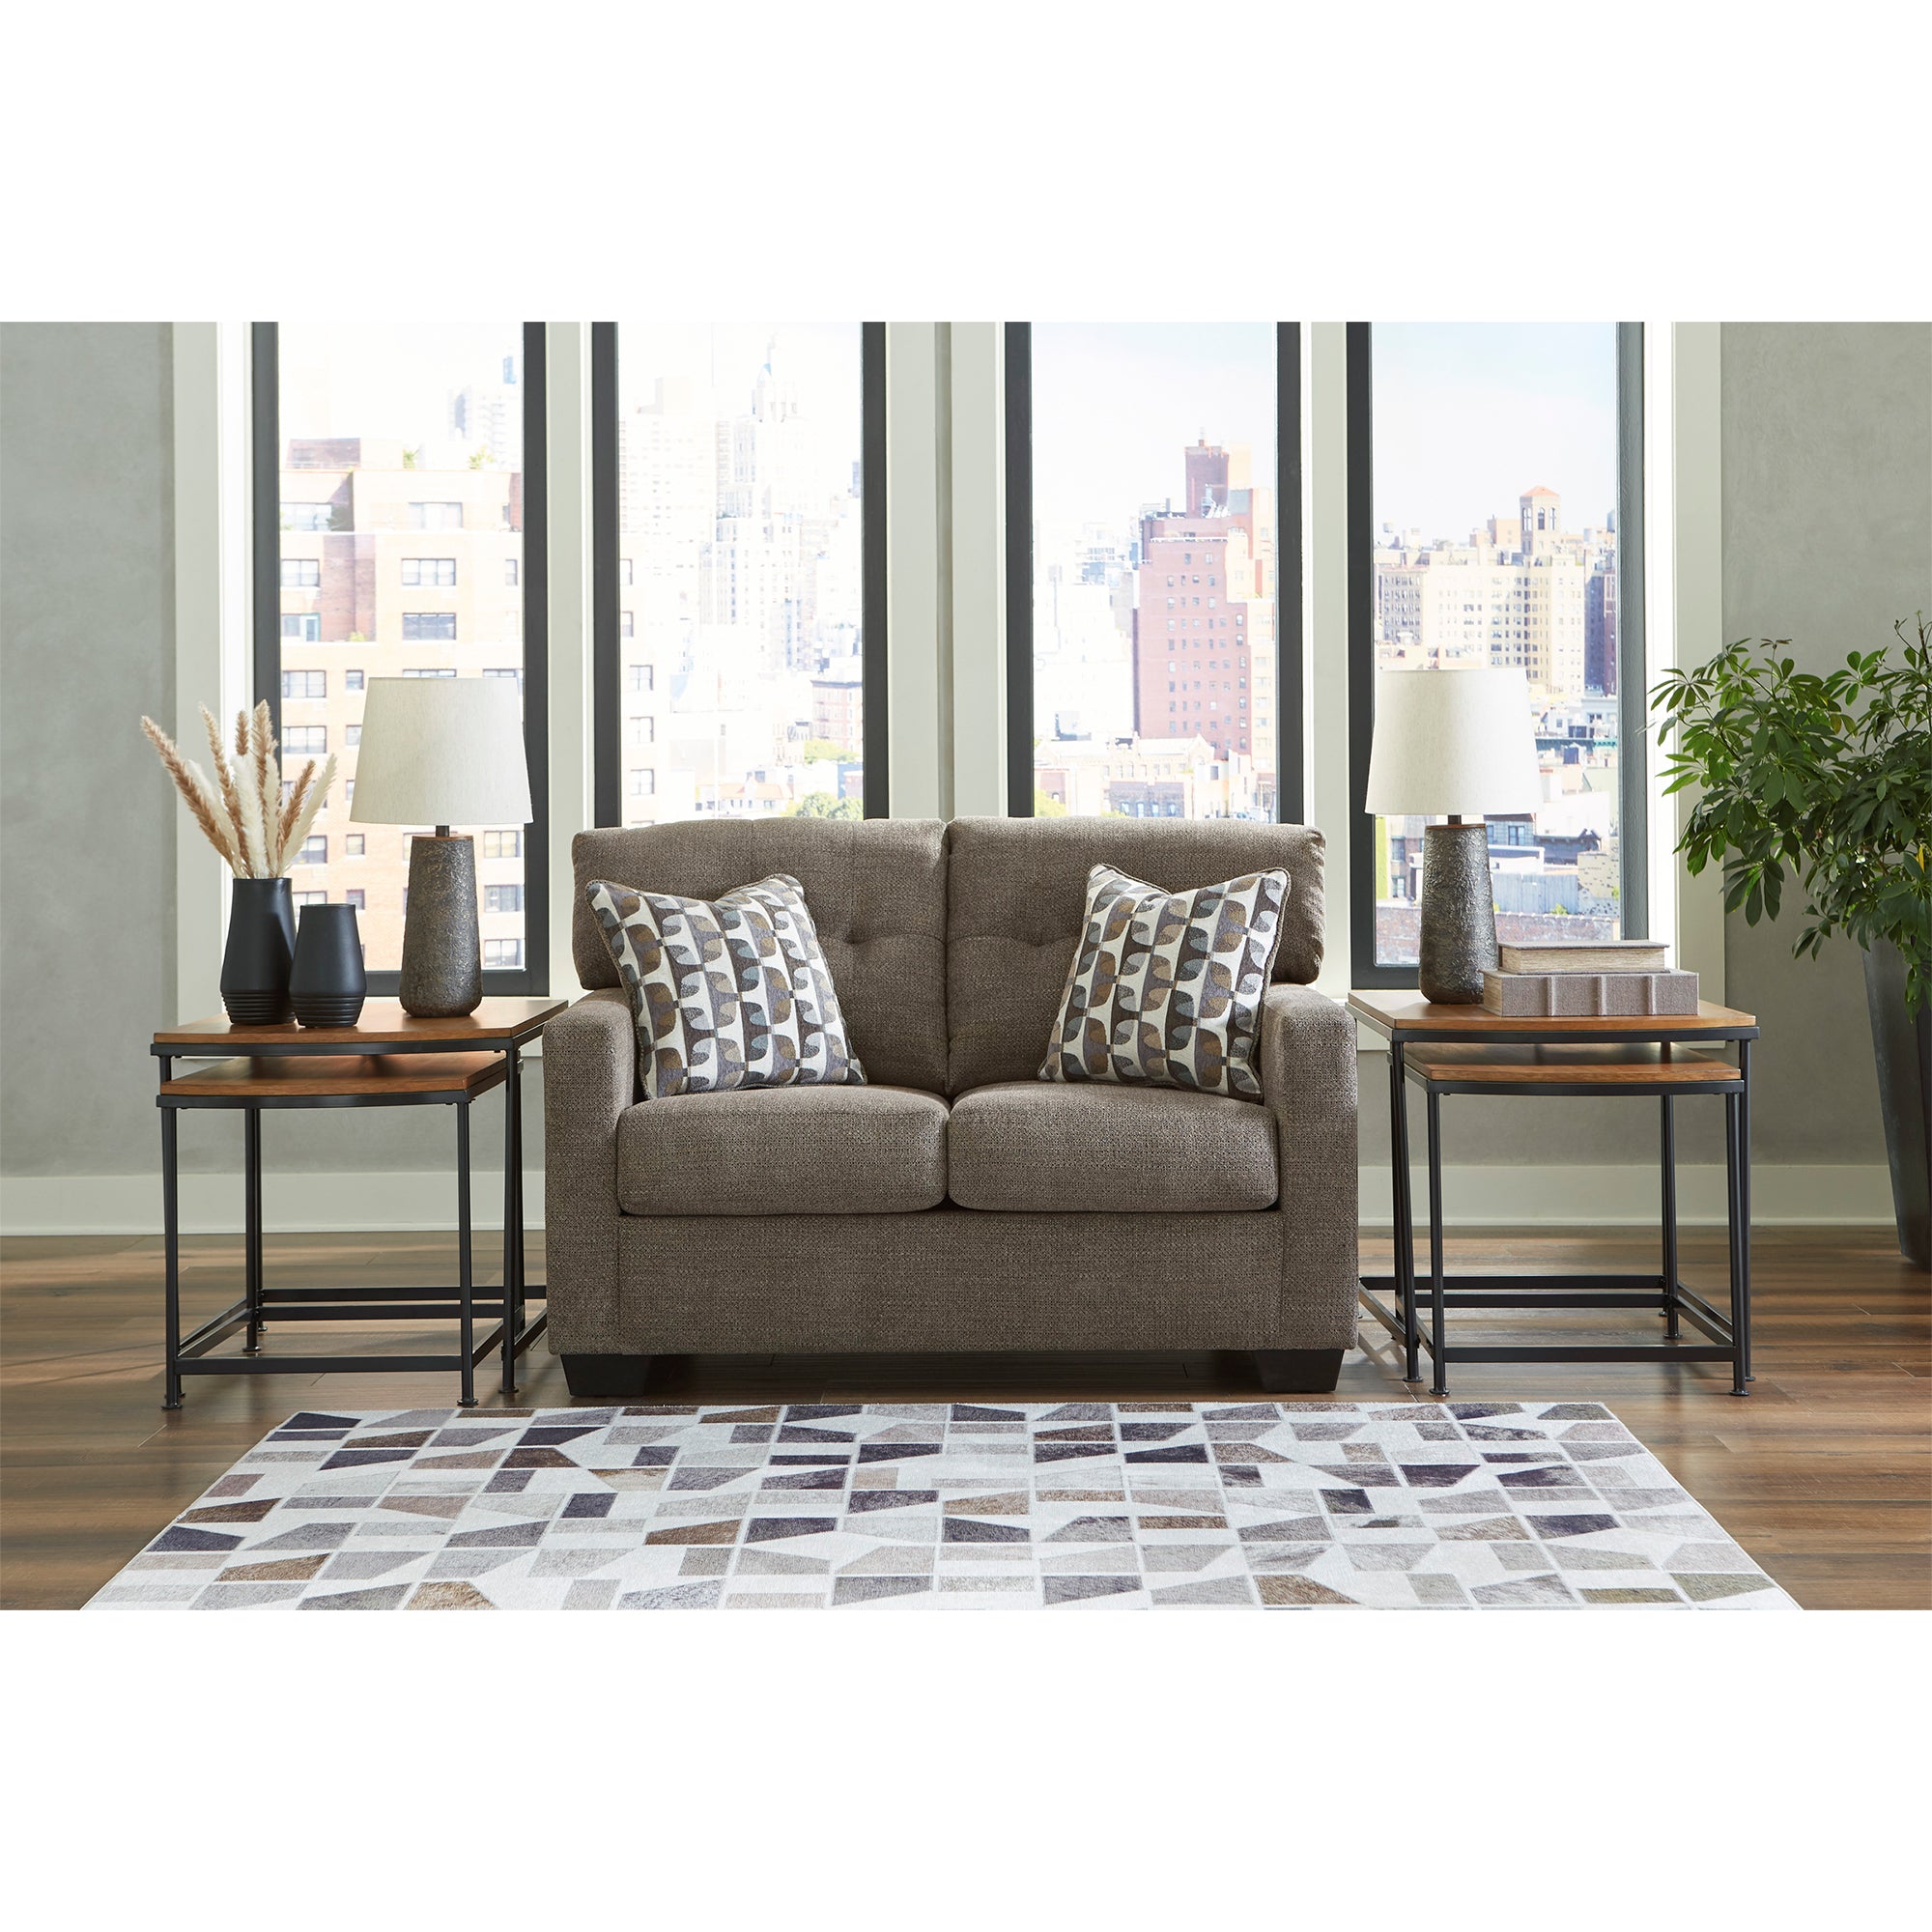 Elegant chocolate-colored Mahoney Loveseat, perfect for small spaces and stylish interiors